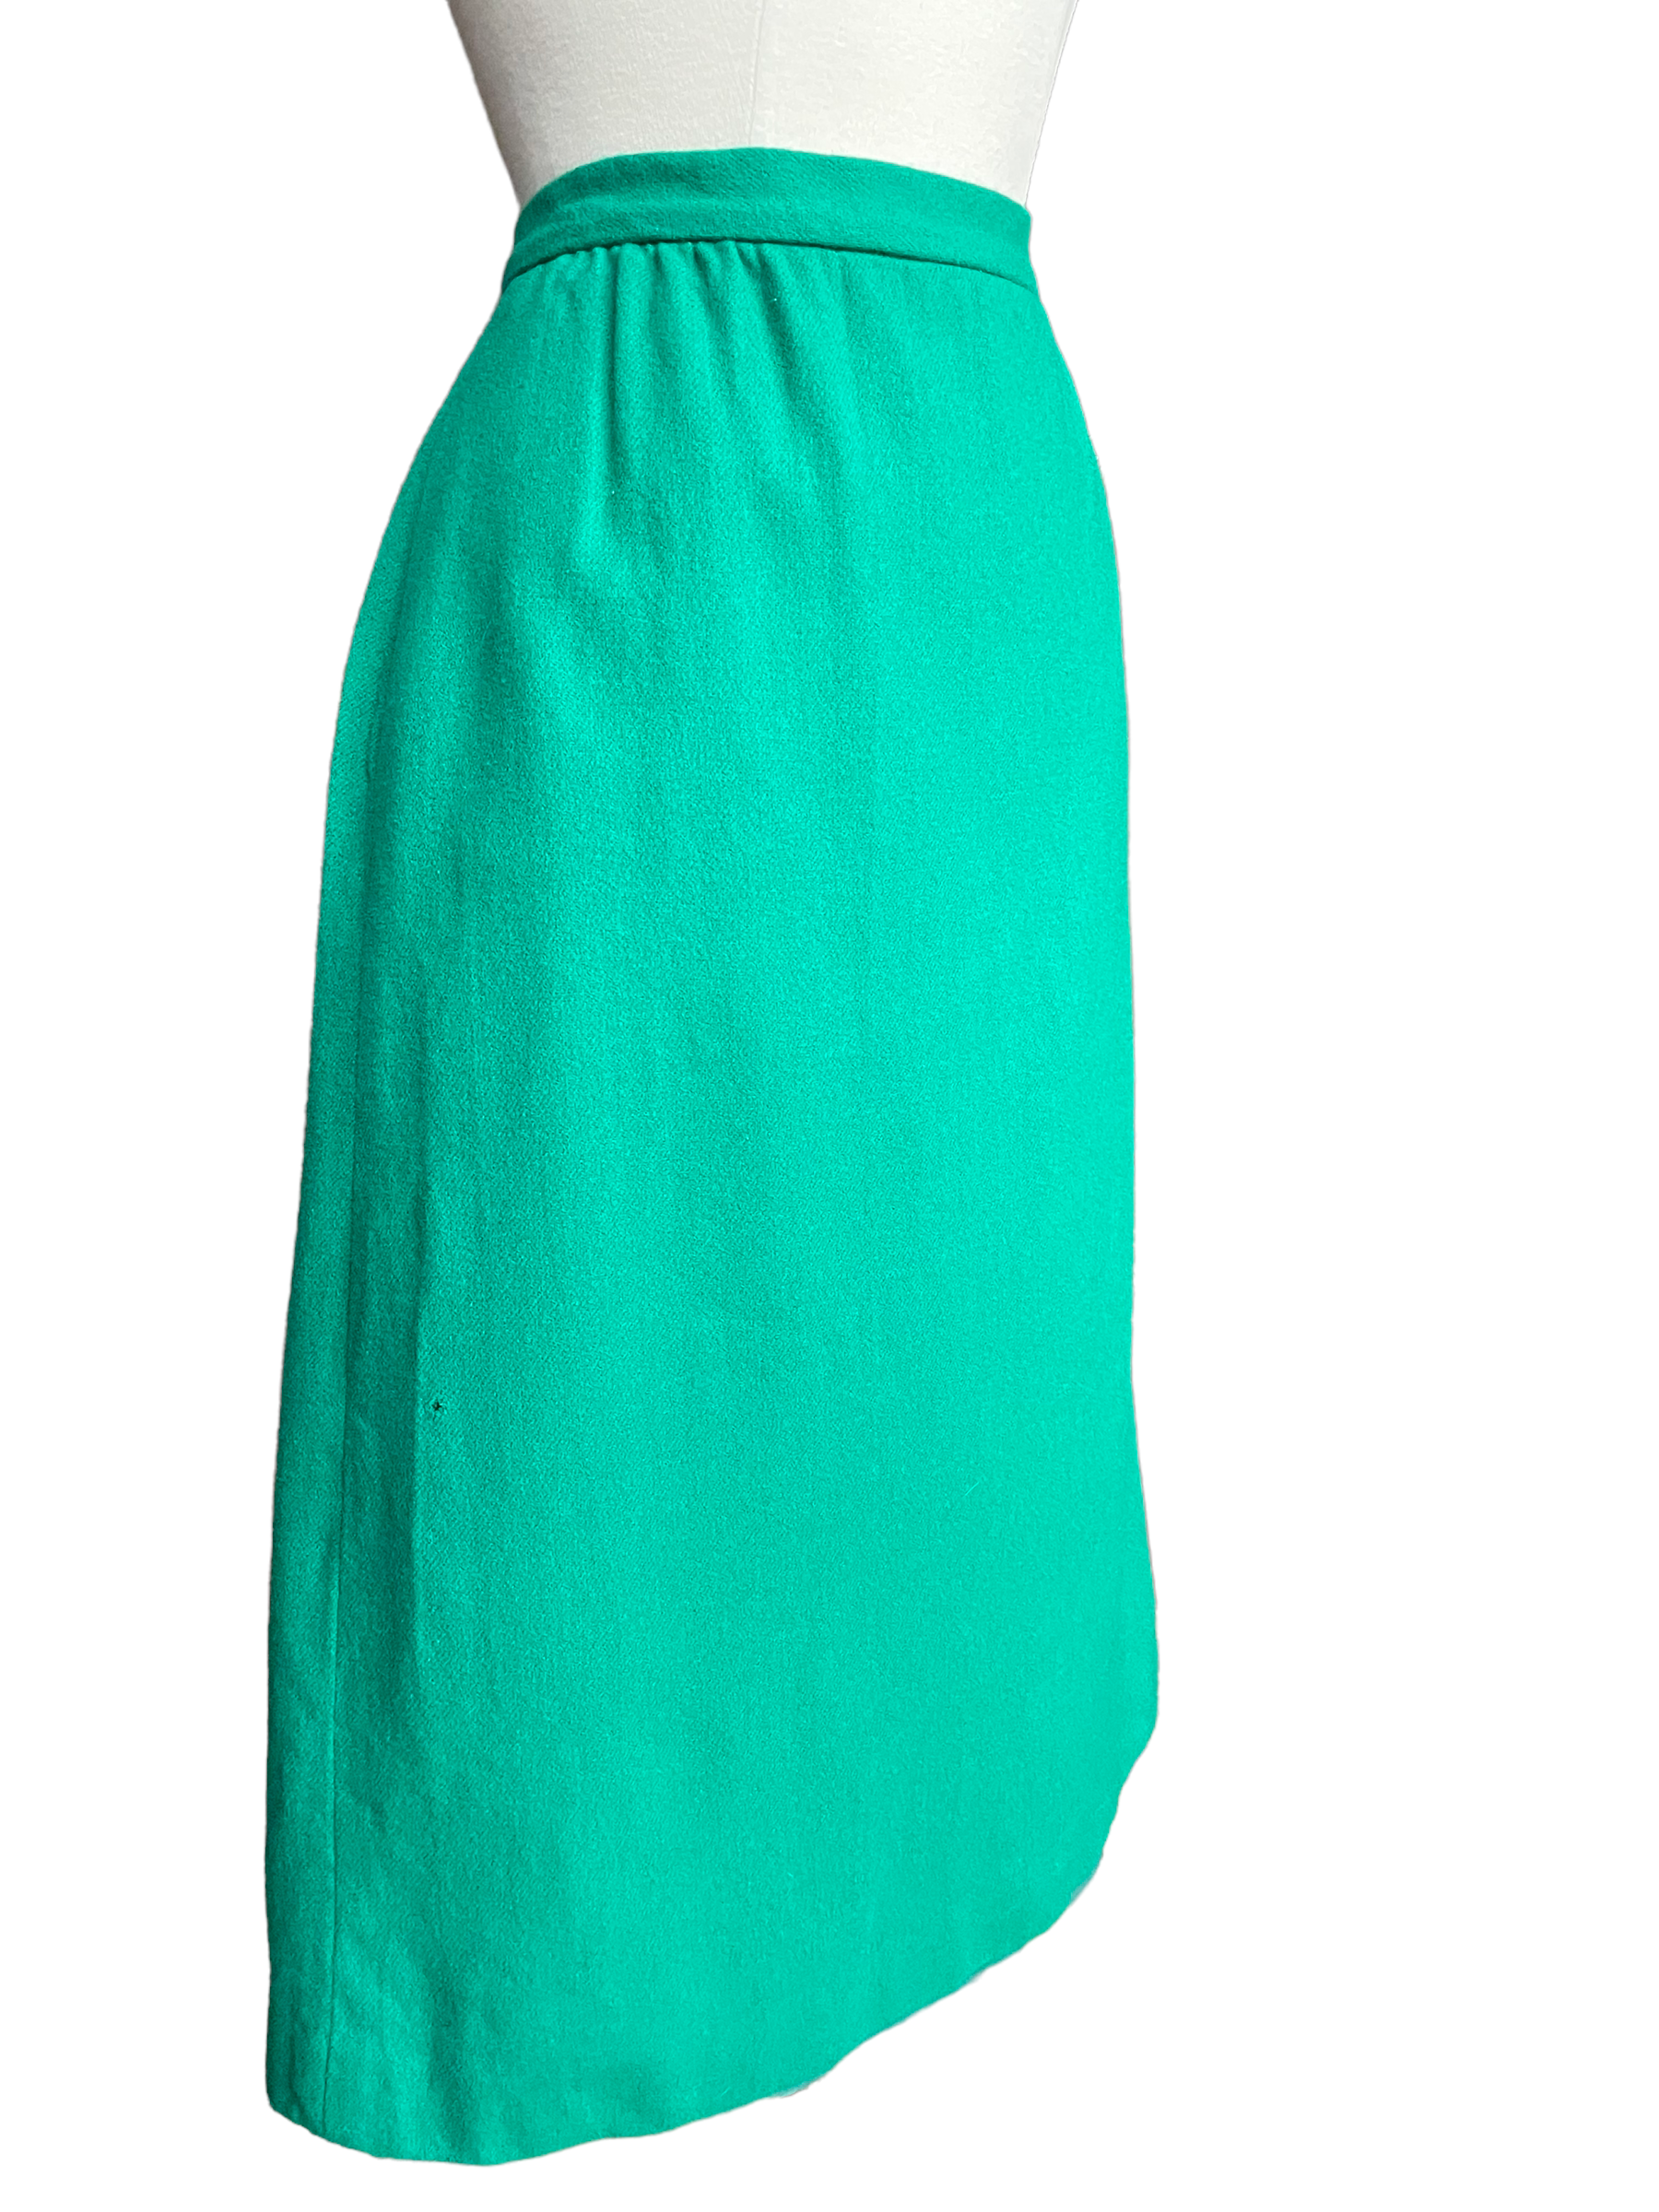 Right side view of Vintage 1960s Green Wool Pencil Skirt | Barn Owl Vintage | Seattle Vintage Skirts